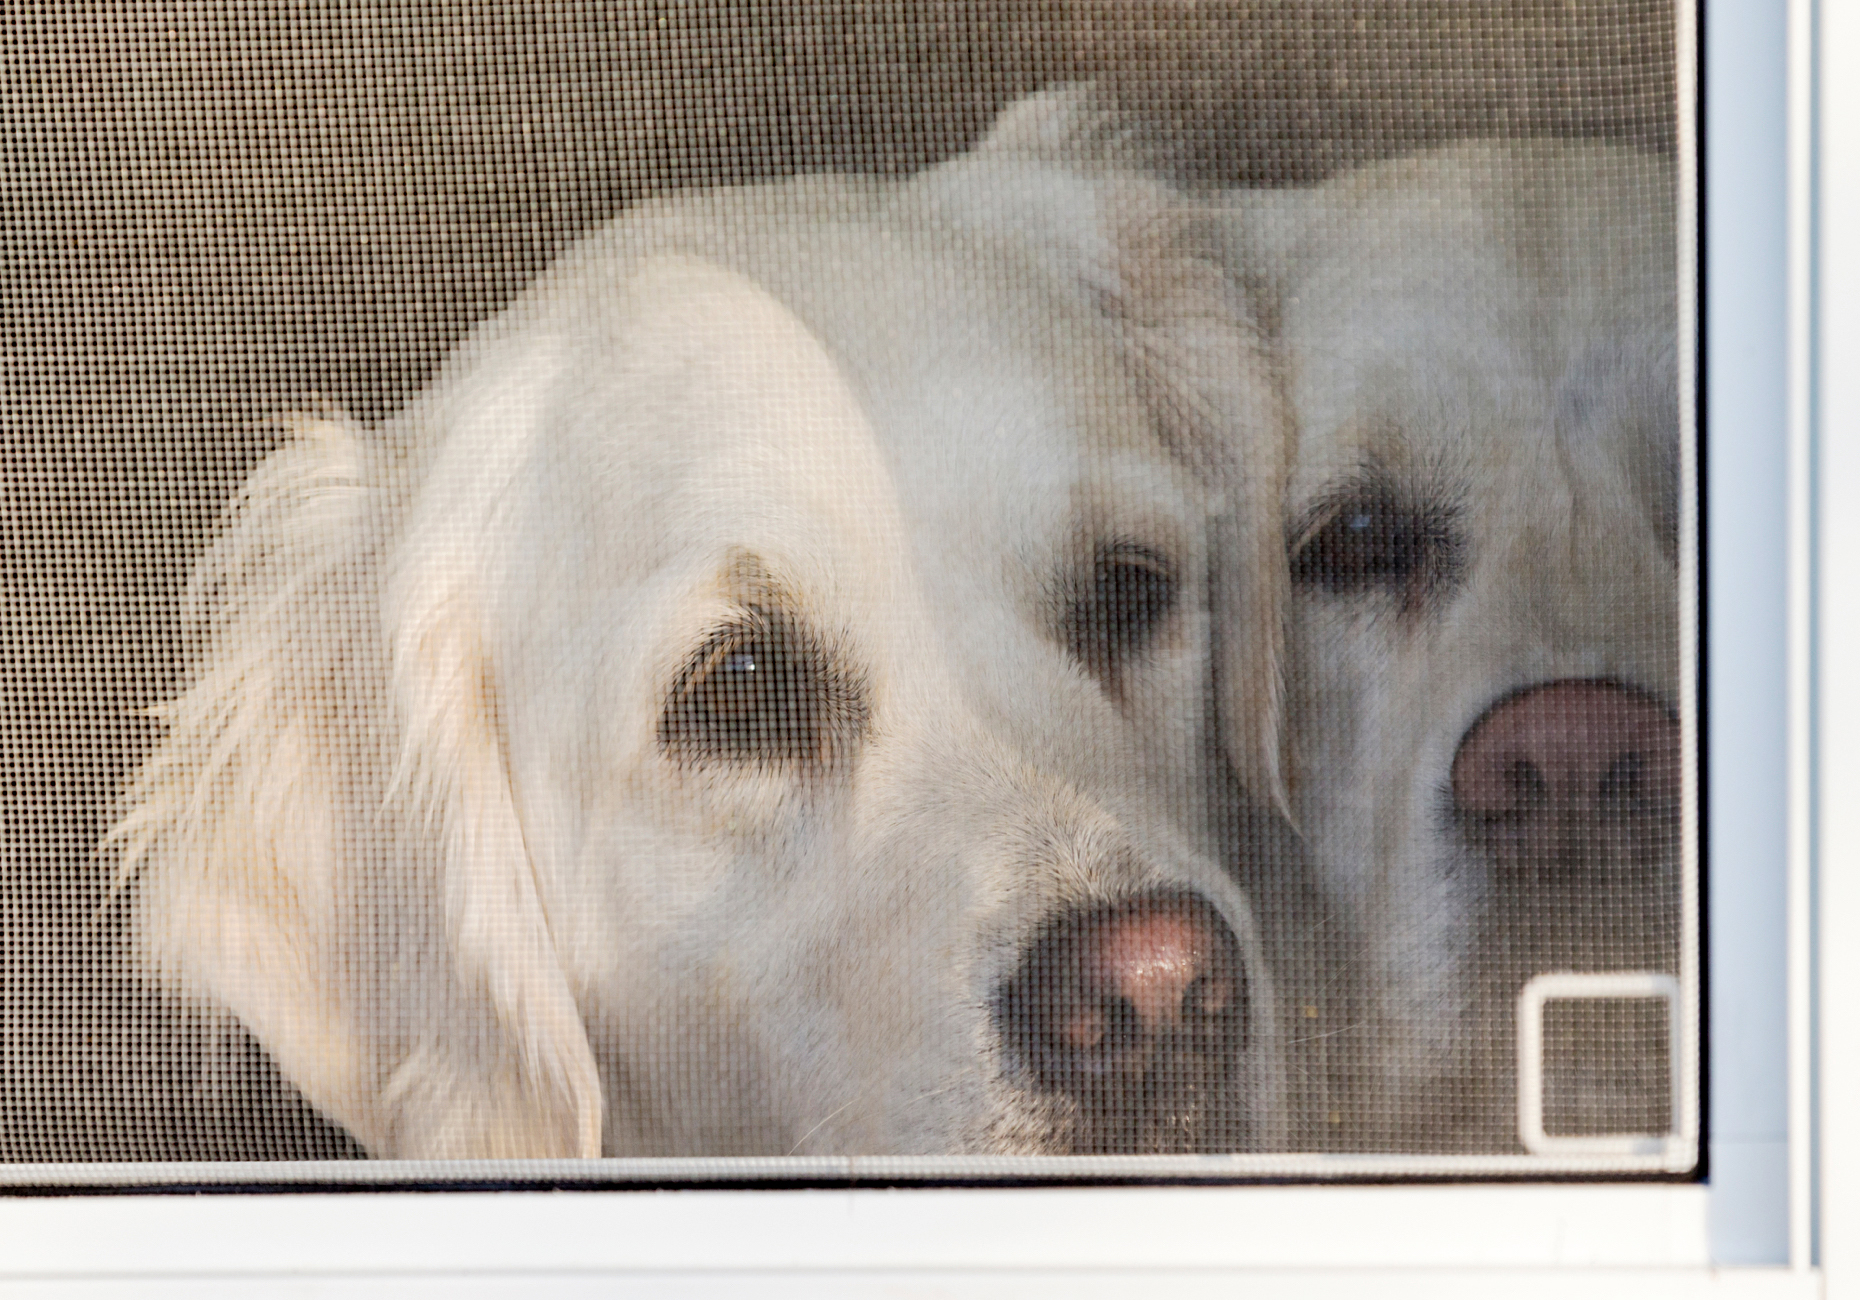 Two Platinum colored Golden Retriever dogs looking out a window.